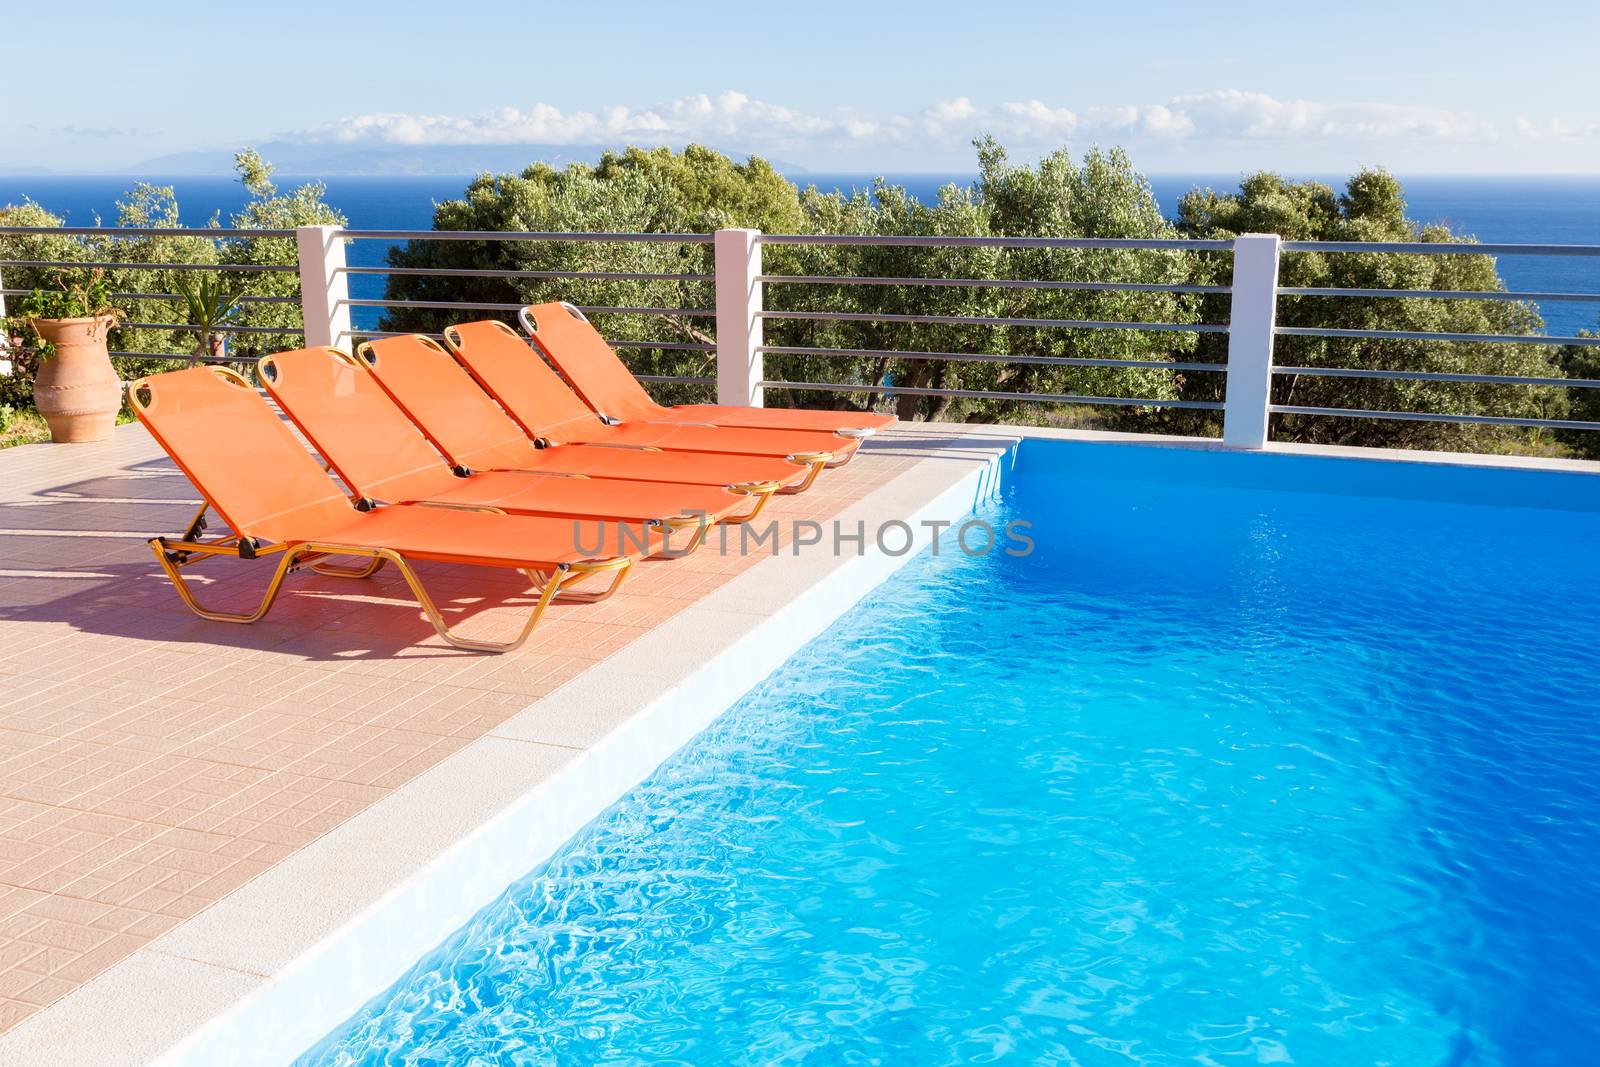 Row of orange loungers for relaxing in vacation near blue swimming pool